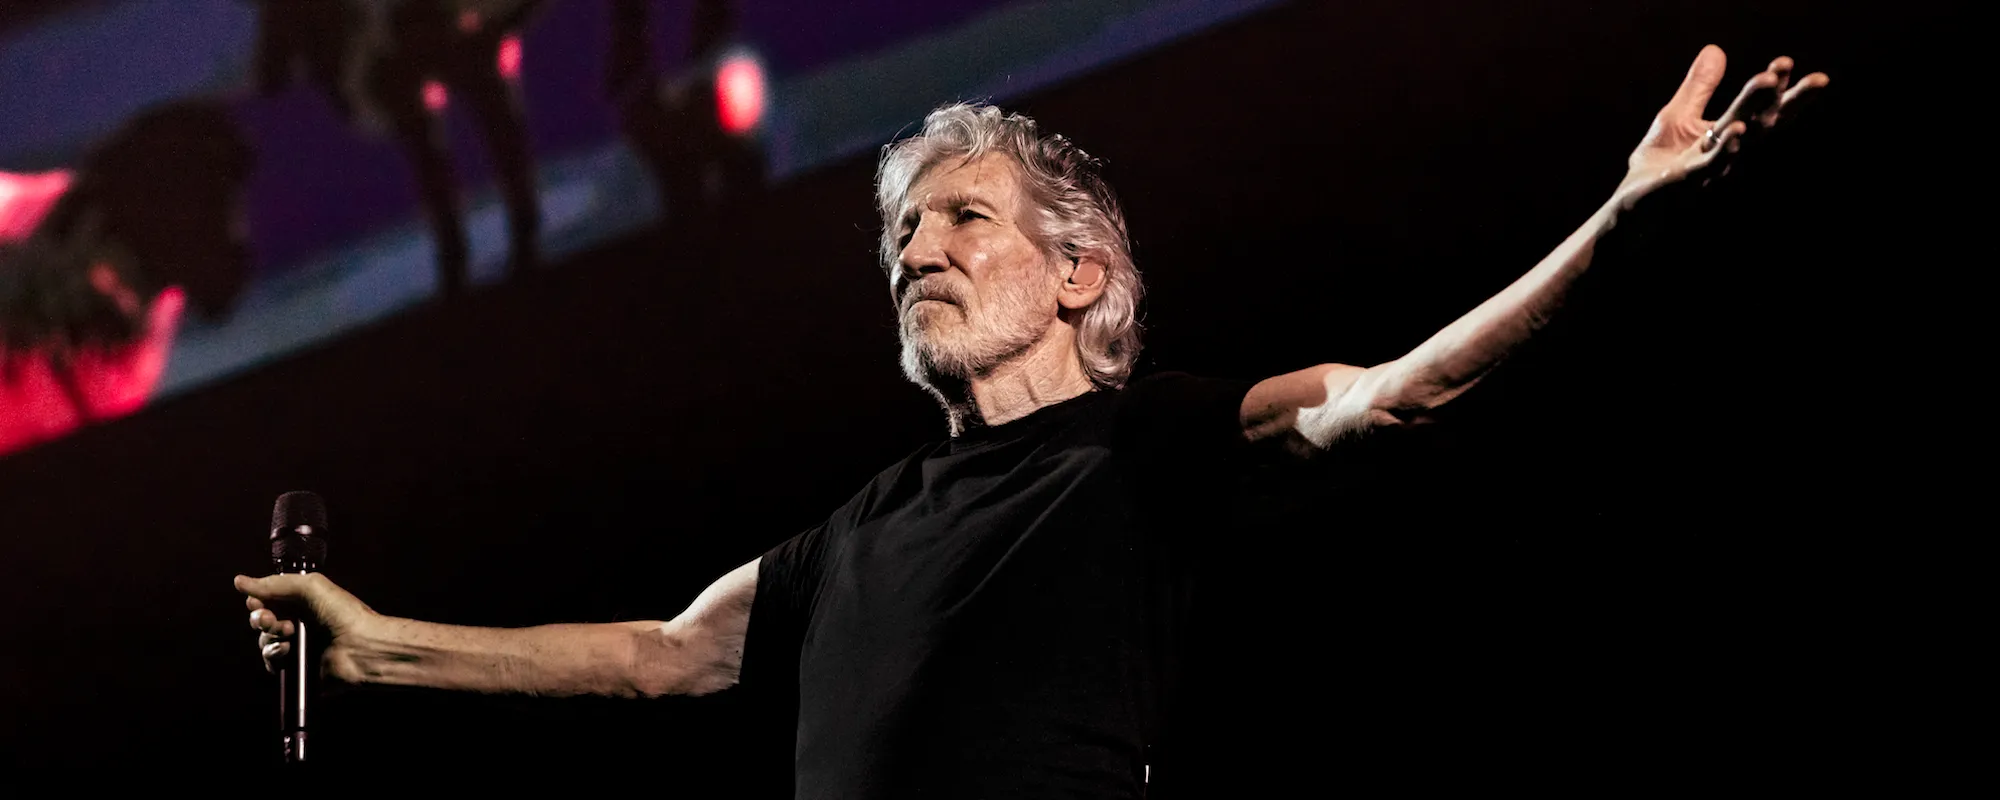 PHOTO GALLERY: Roger Waters Kicks Off This Is Not a Drill Tour, Previews New Song “The Bar”